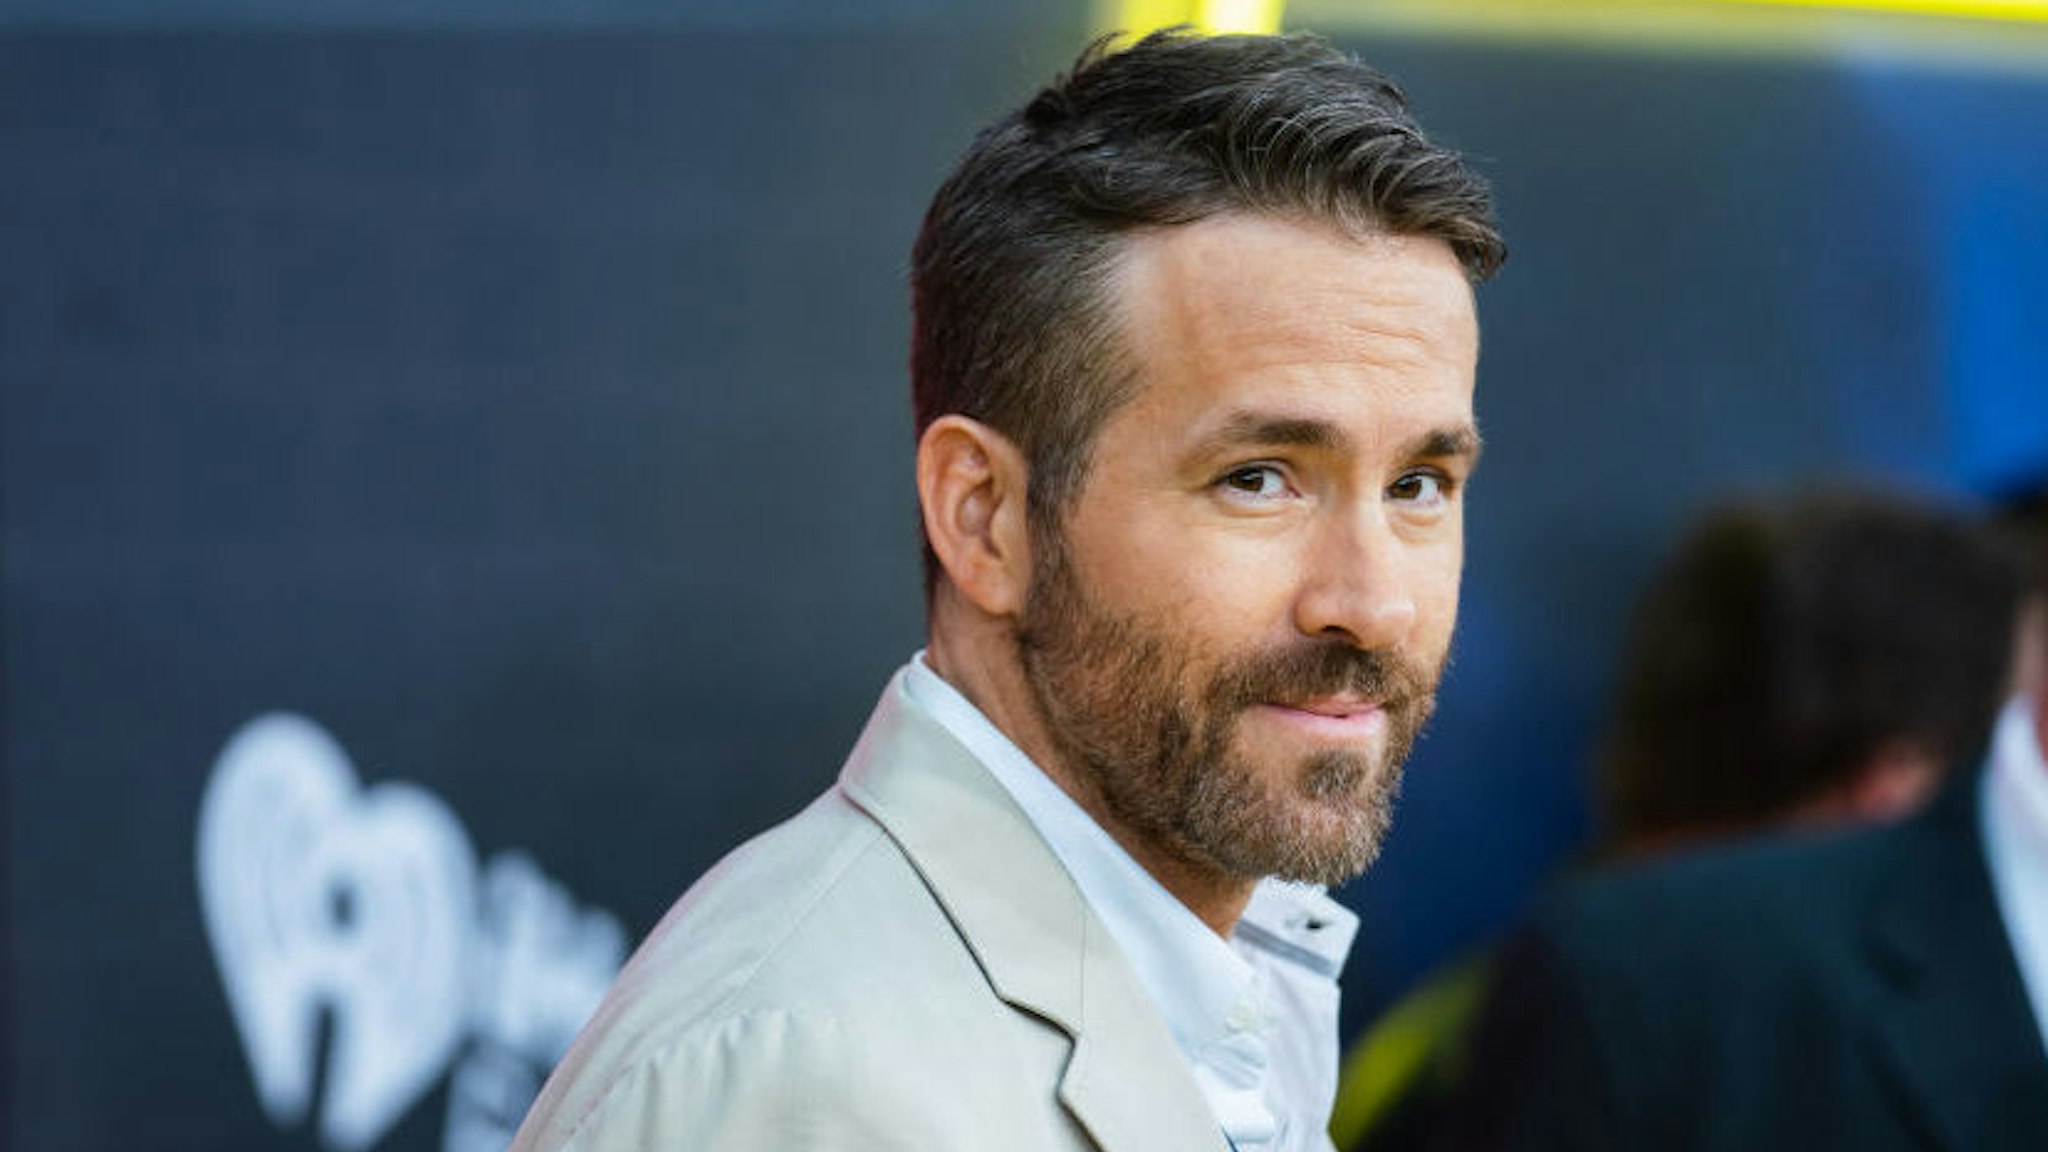 Ryan Reynolds attends the "Pokemon Detective Pikachu" U.S. Premiere at Times Square on May 02, 2019 in New York City. (Photo by Mark Sagliocco/FilmMagic)